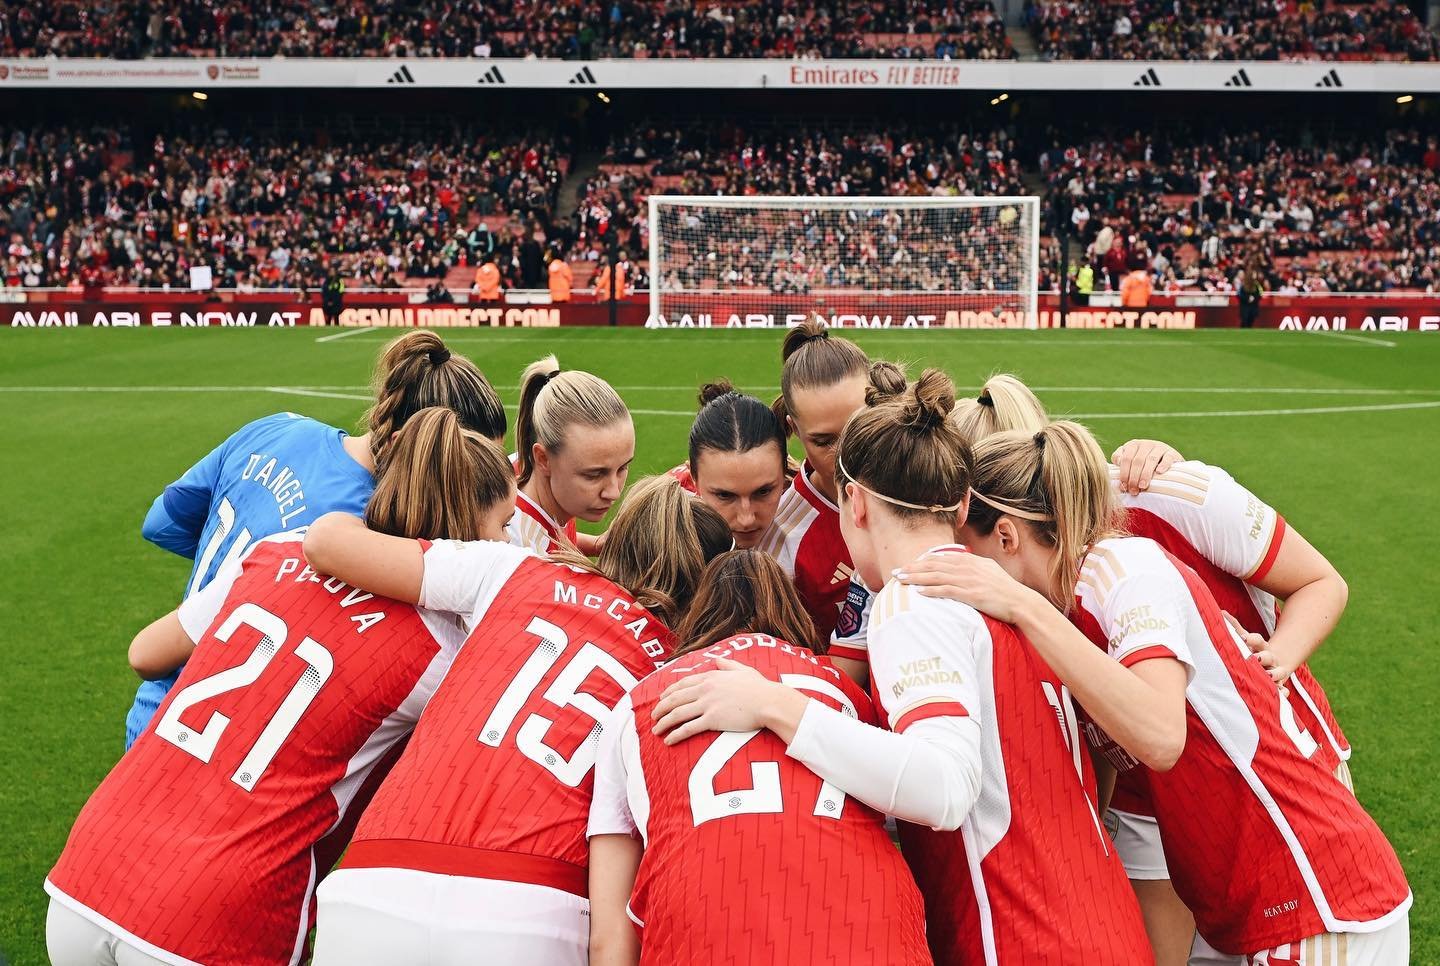 6️⃣0️⃣,1️⃣6️⃣0️⃣ 

@arsenalwfc sell out Emirates Stadium to set a new @barclayswsl record 🏟

📷 for @arsenalwfc 
 
#Arsenal #AFC #AWFC #Emirates #WSL #football